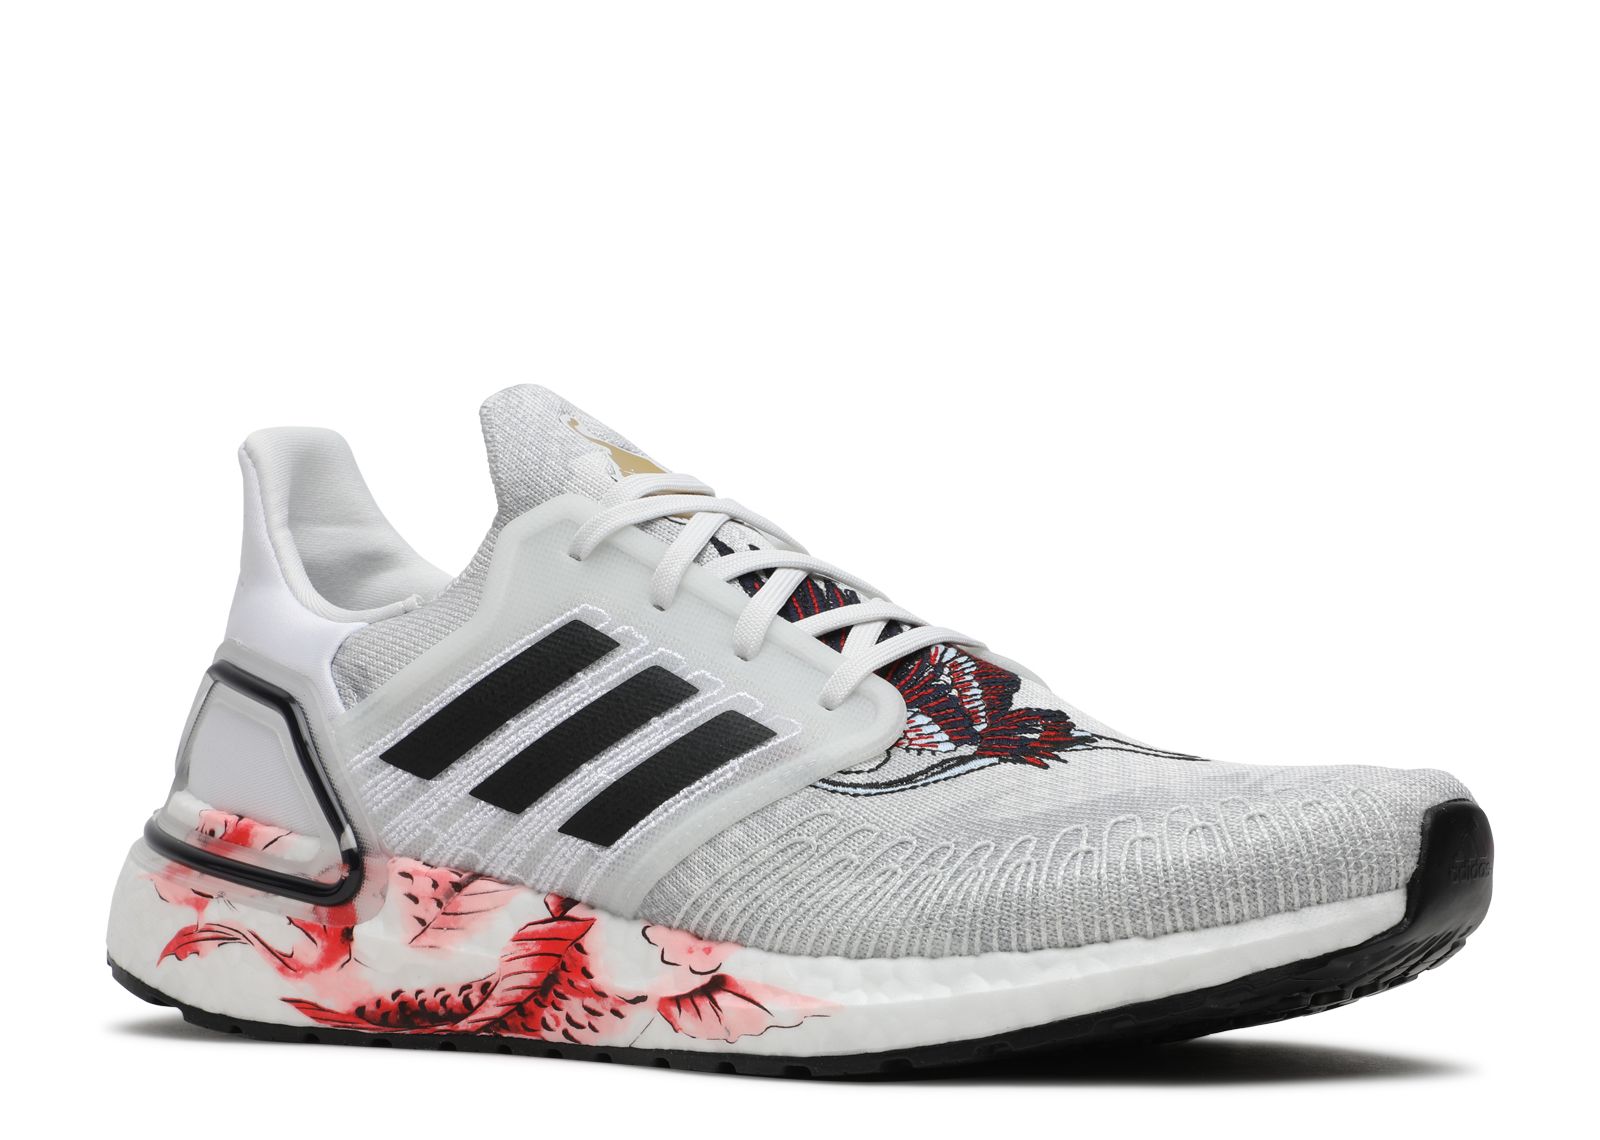 adidas ultra boost 20 floral